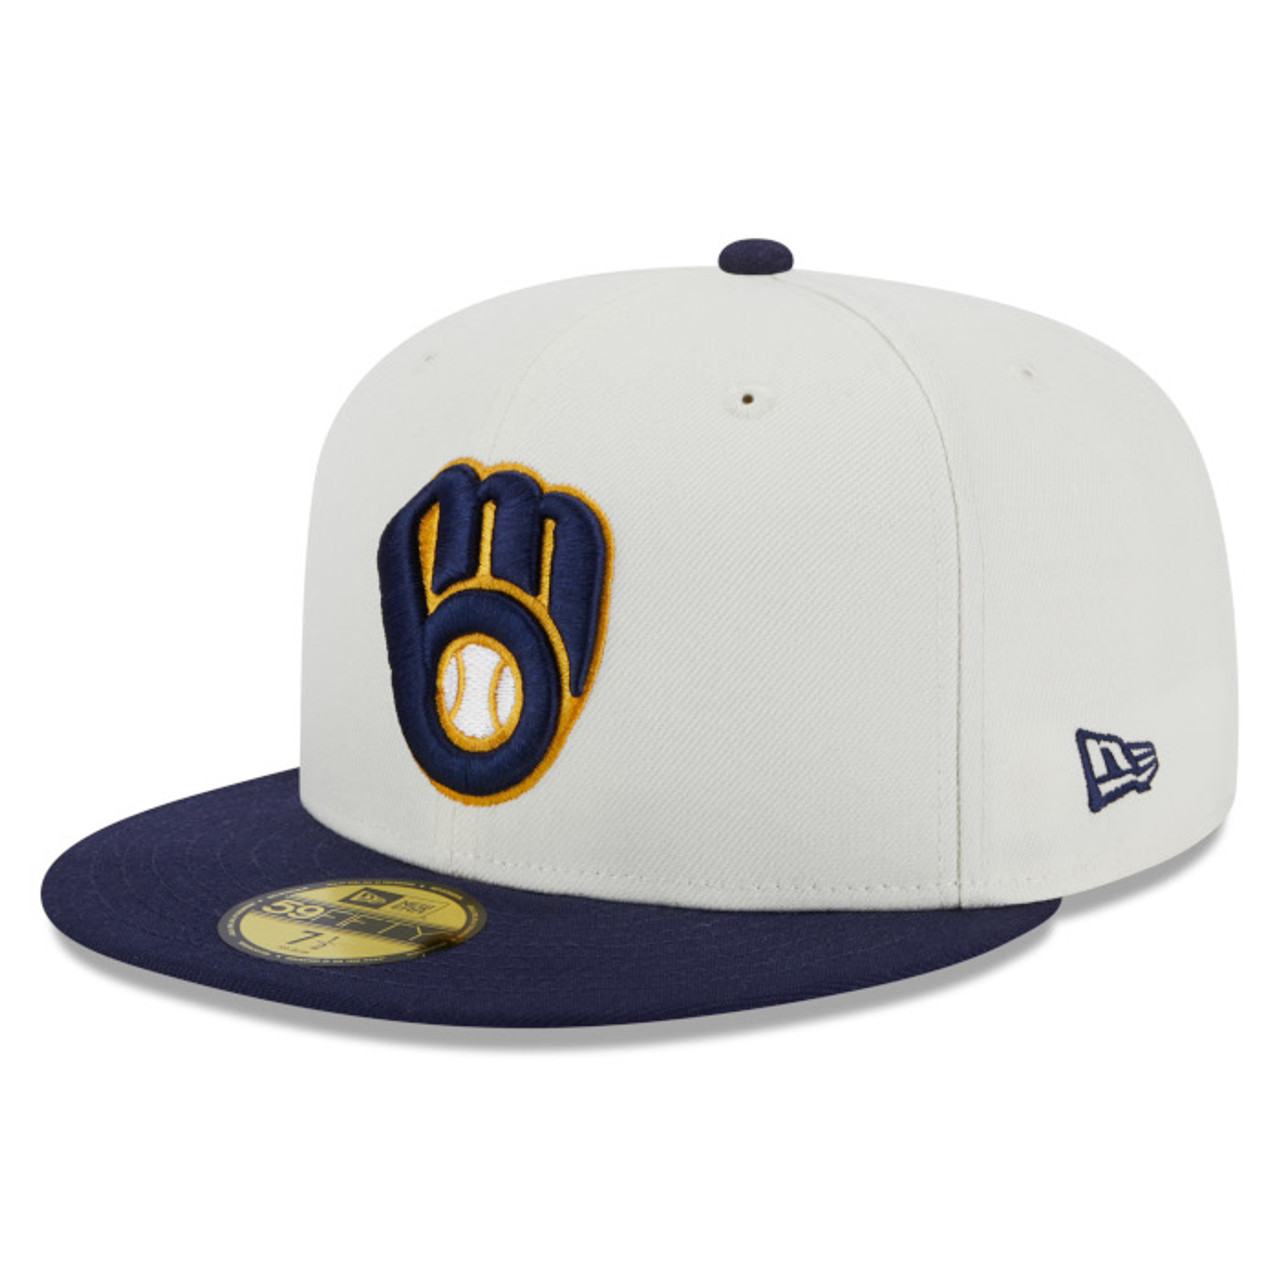 Mens New Era Milwaukee Brewers Cooperstown Collection Retro 59FIFTY Fitted Cap